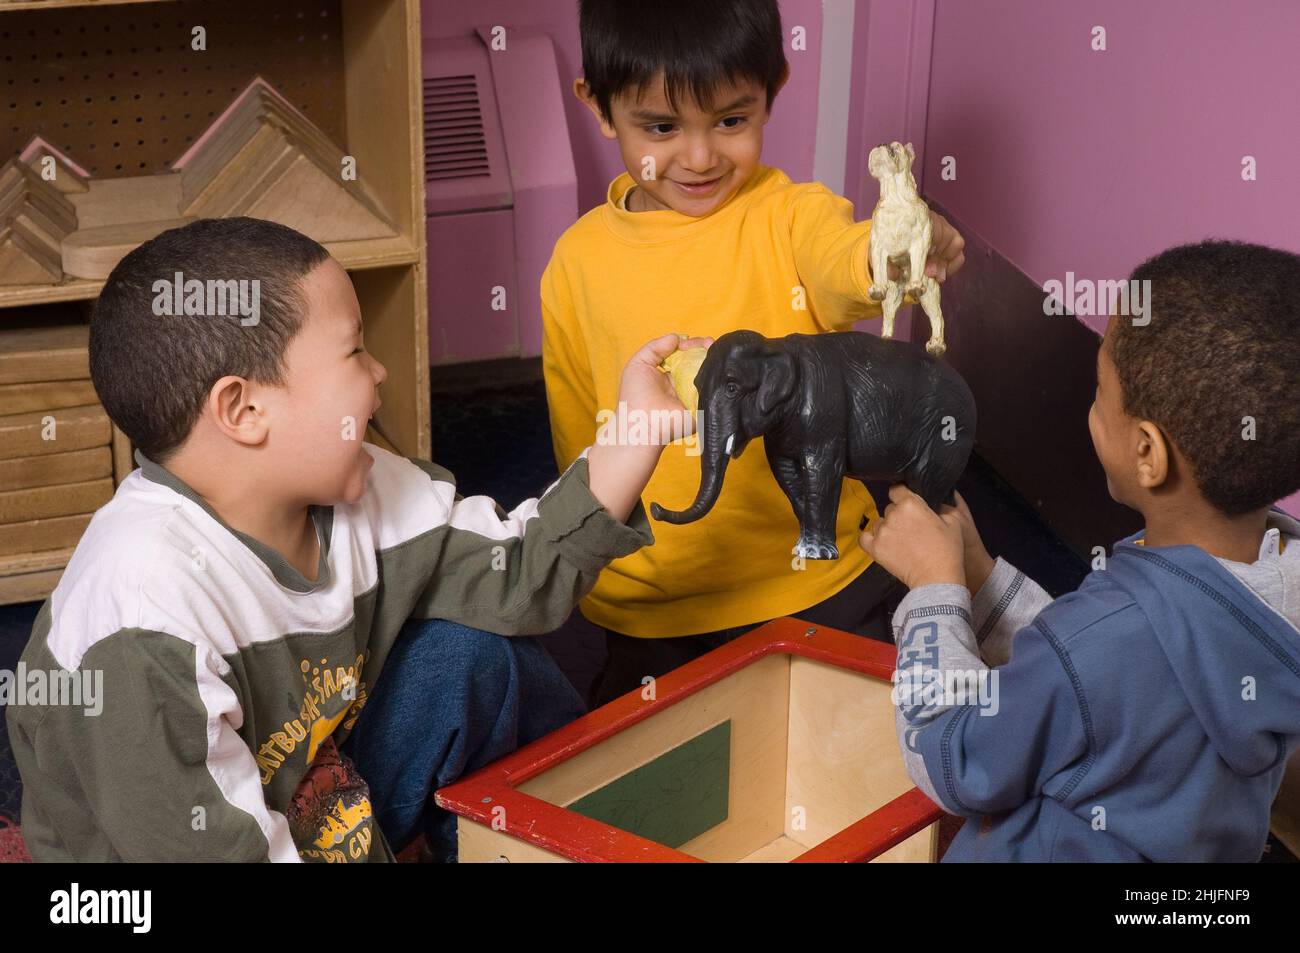 Education Preschool classroom ages 4-5 group of three boys playin together with toy animals, laughing and talking Stock Photo